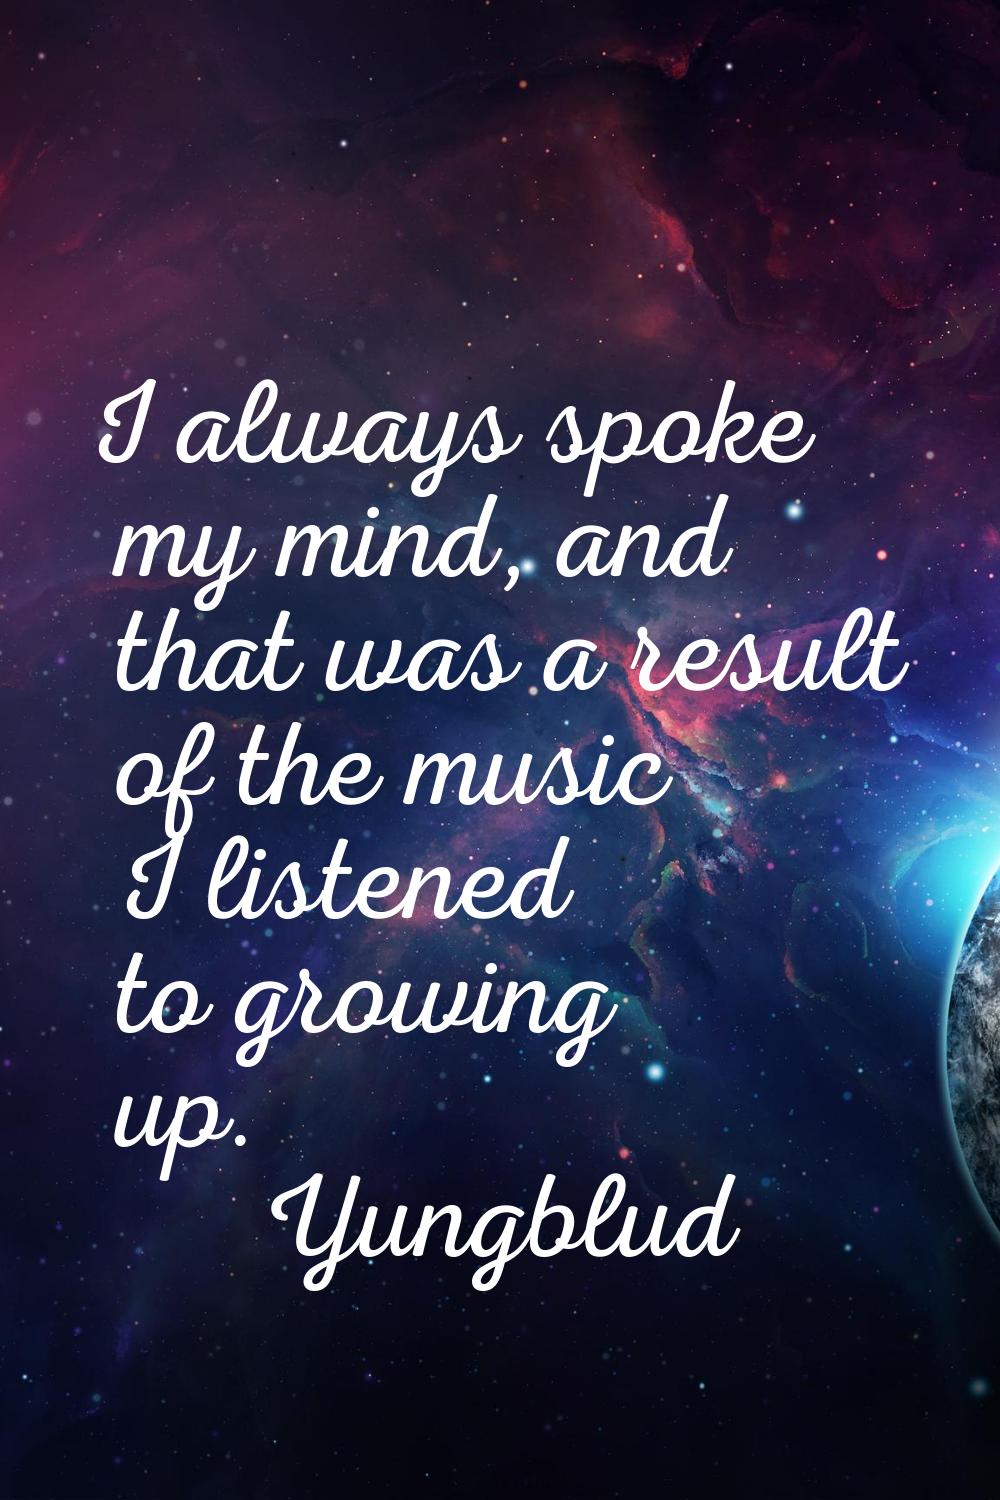 I always spoke my mind, and that was a result of the music I listened to growing up.